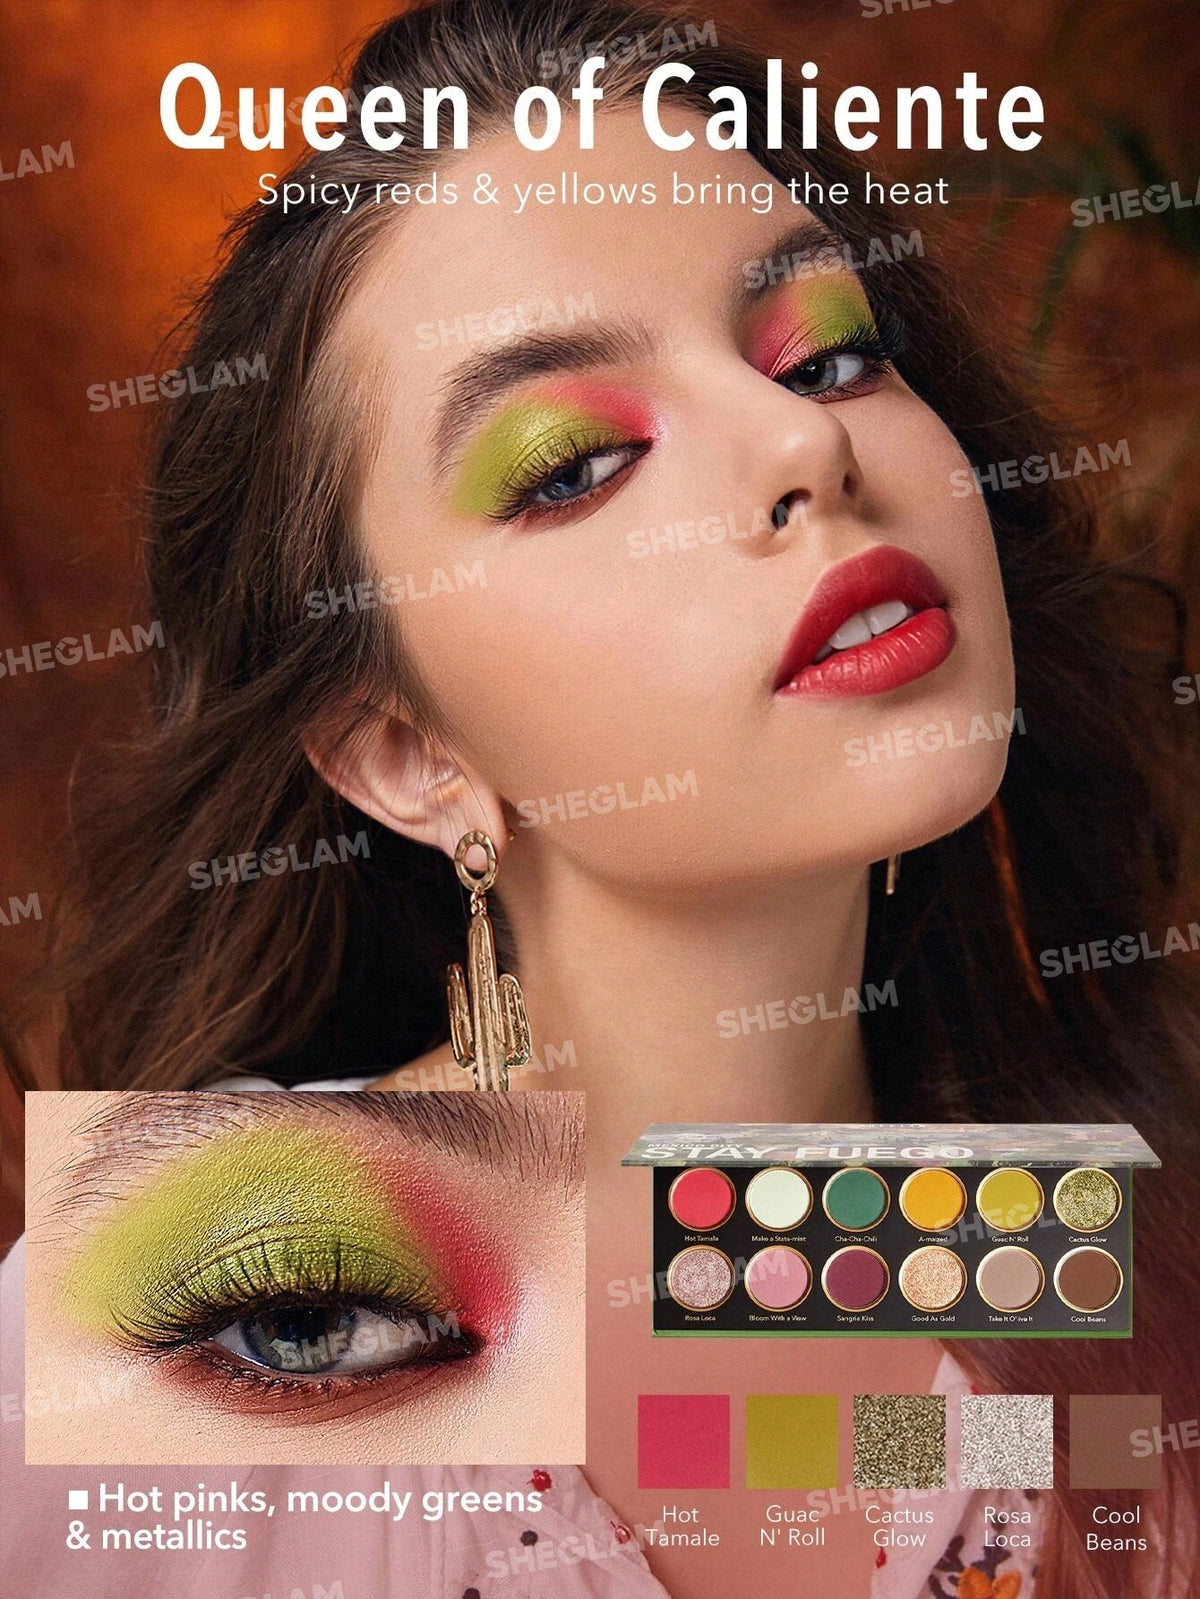 SHEGLAM Stay Fuego, Mexico Palette 12-Clolor Shimmer Metallic Matte Eyeshadow Palette Green Gilding Shimmer Highly Pigmented Colors Long Lasting  No Smudge Durable Long Wear Eyeshadow Eye Makeup Cosmetics Black Friday Winter Goth Eyeshadow